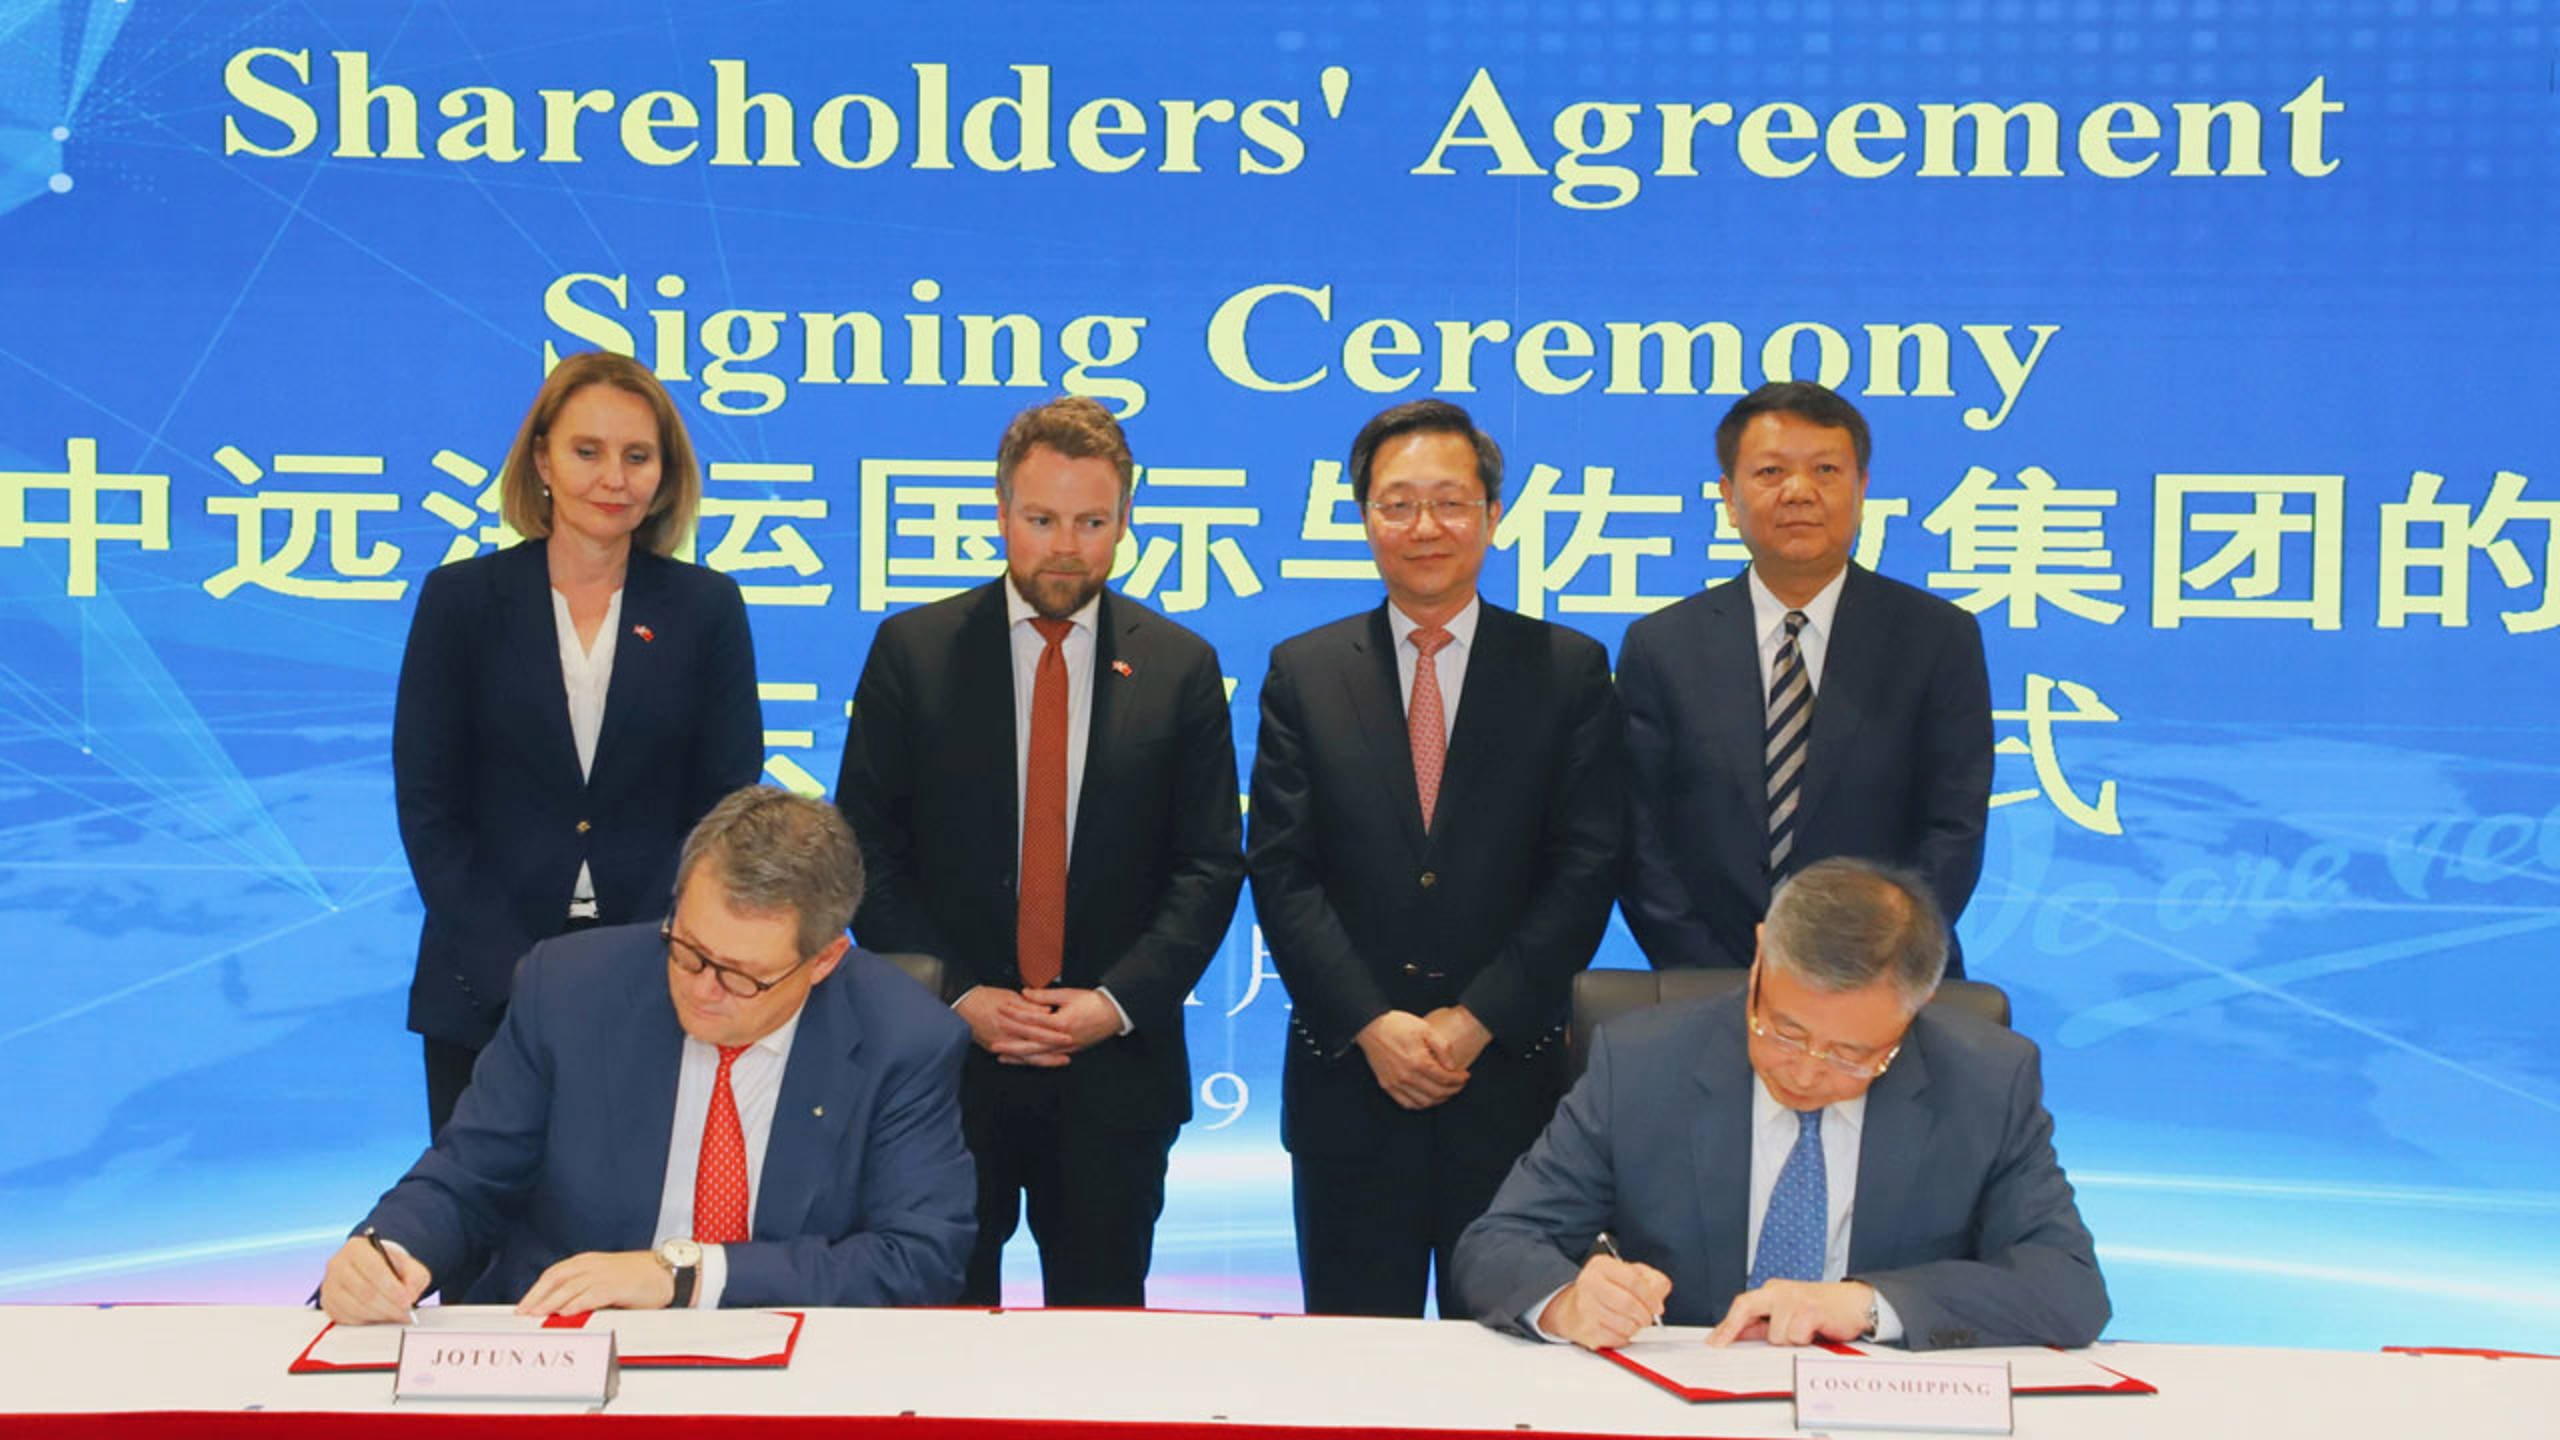 Shareholders' Agreement Signing Ceremony